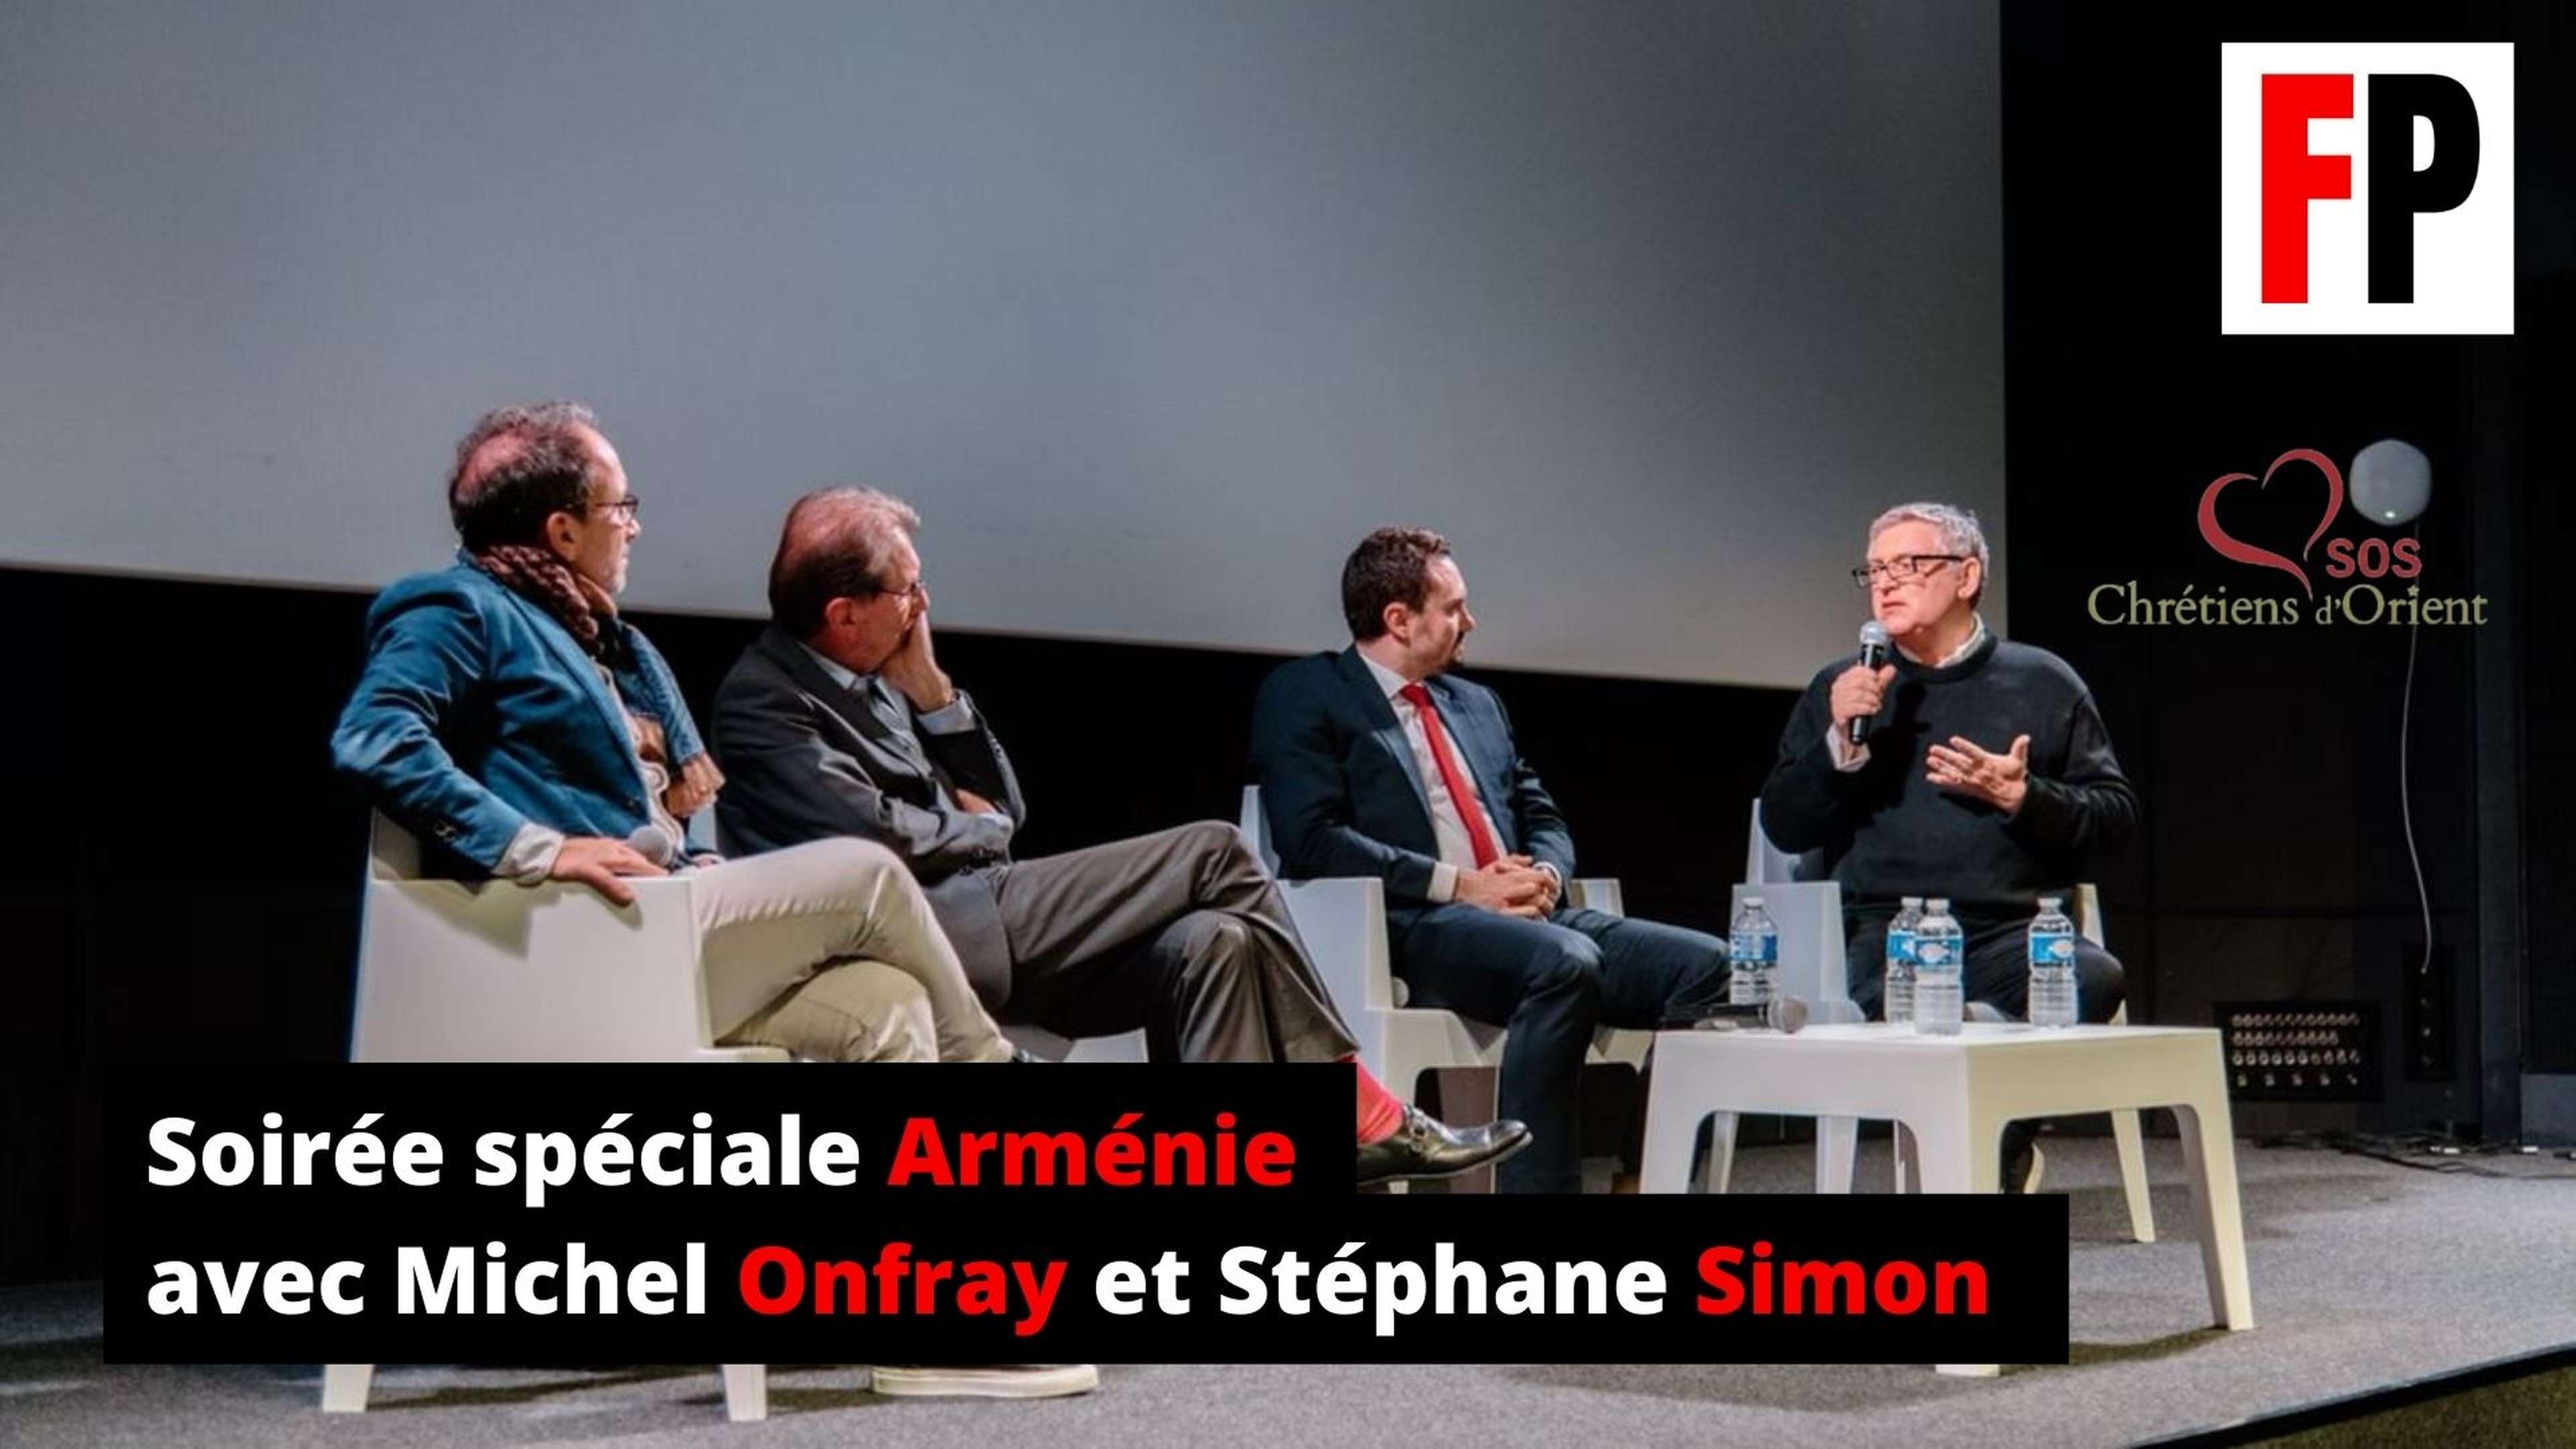 /assets/images/upload/onfray-simon-armenie-sos-chretiens-d-orient-conference.jpg